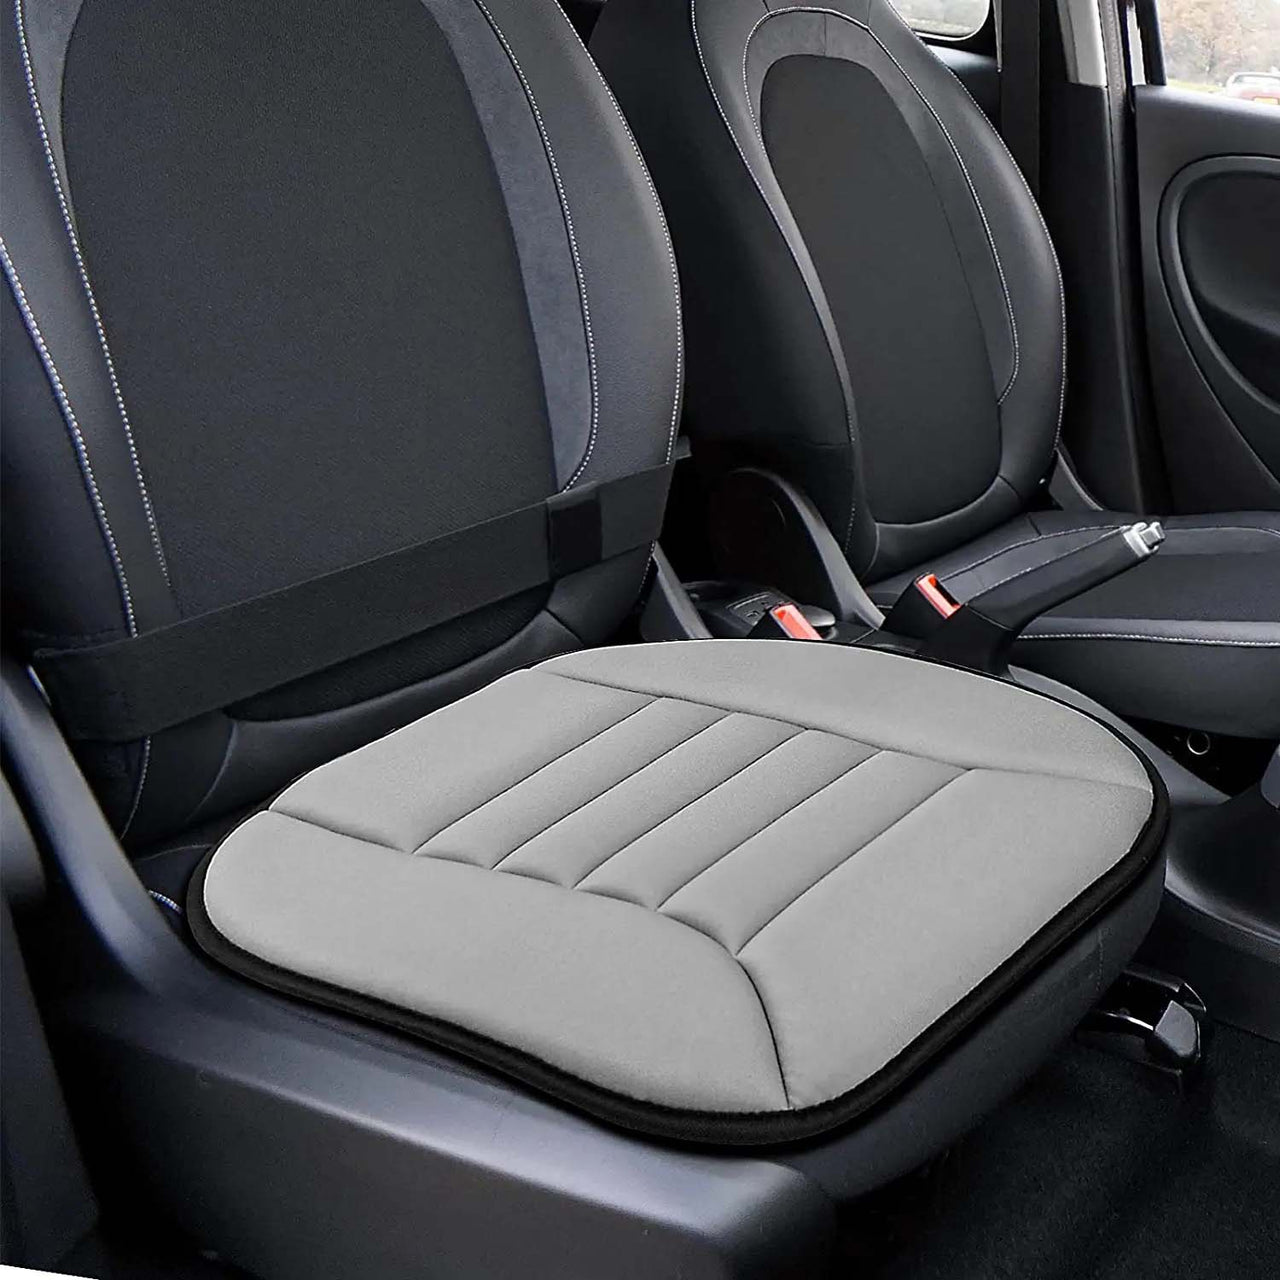 Car Seat Cushion with 1.2inch Comfort Memory Foam, Custom Fit For Your Cars, Seat Cushion for Car and Office Chair MT19989